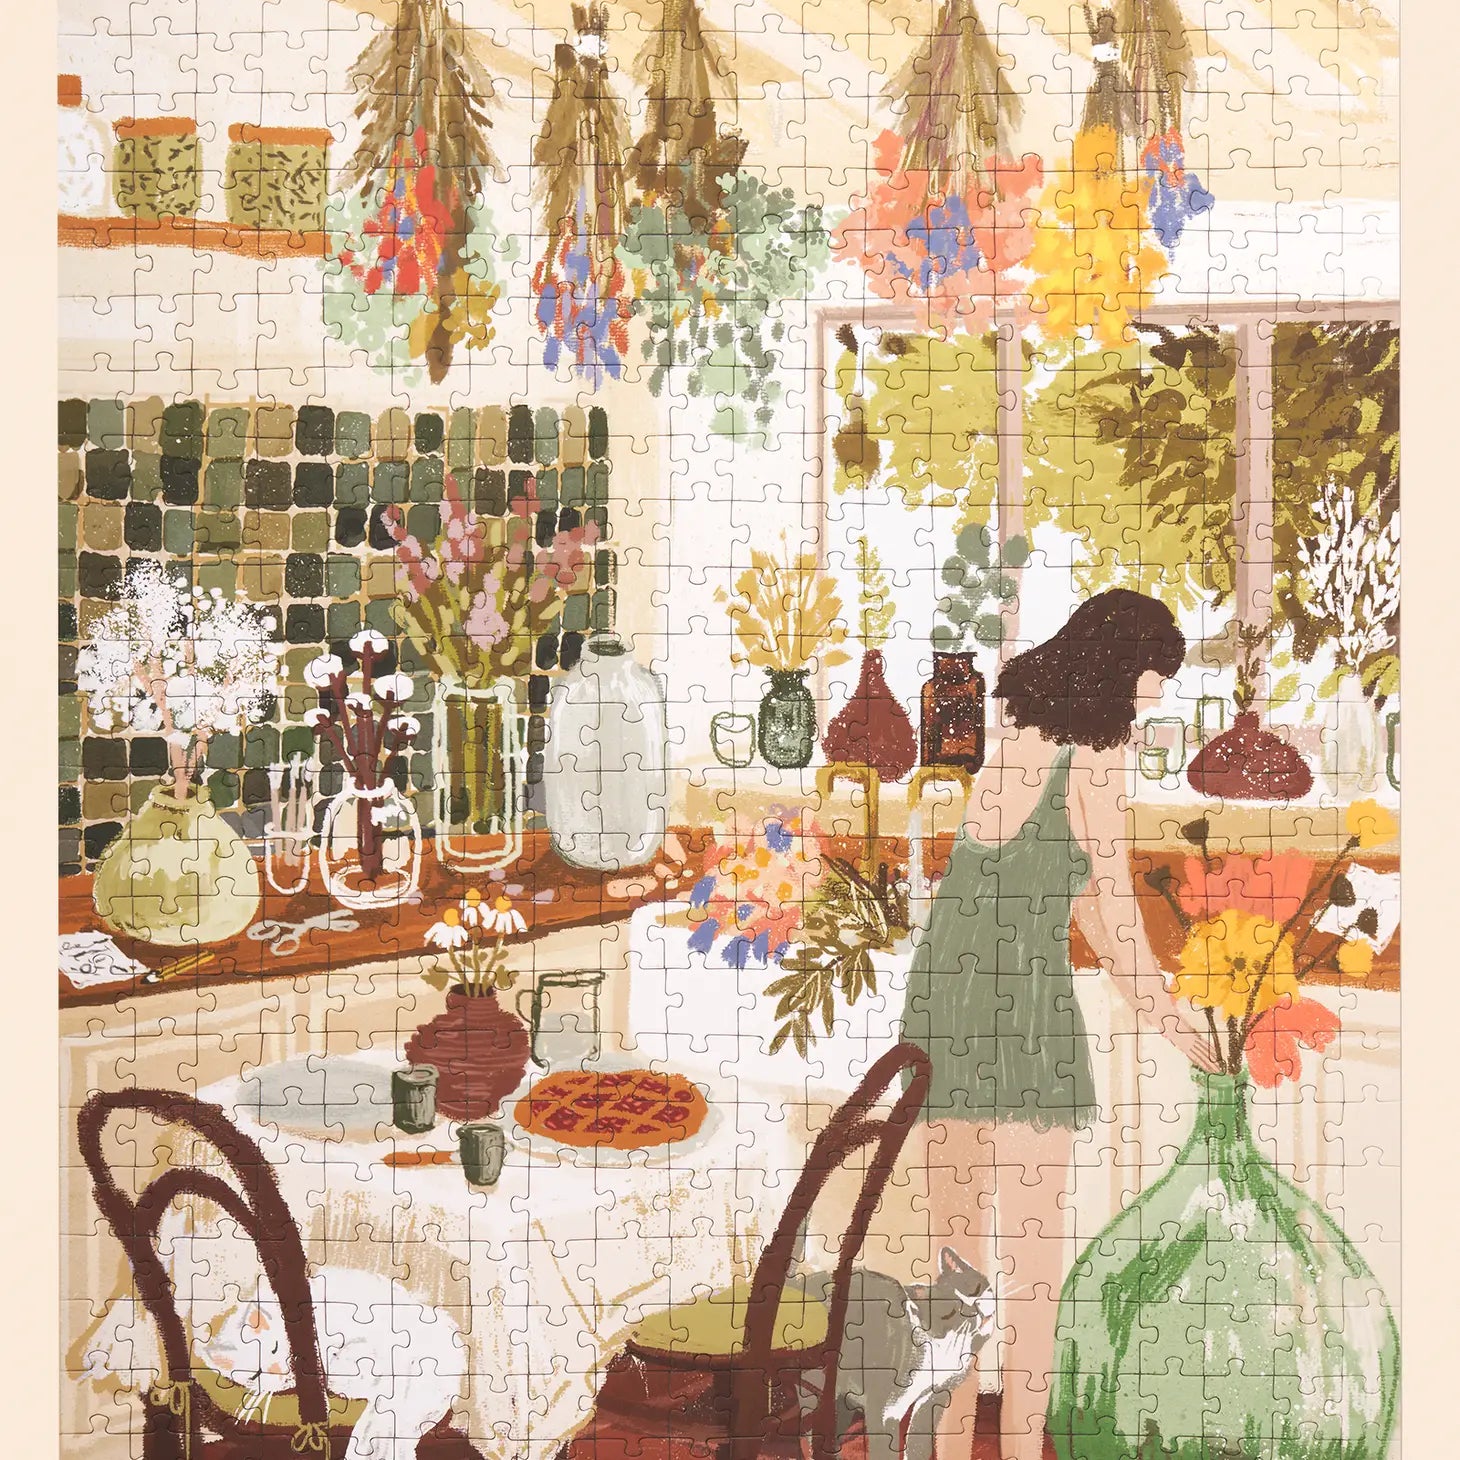 Completed "Home Flowering" Puzzle by Ordinary Habit shows a girl arranging flowers in a large glass vase in her kitchen. There are bunches of flowers drying from the ceiling and smaller vases with flowers scattered around the room.